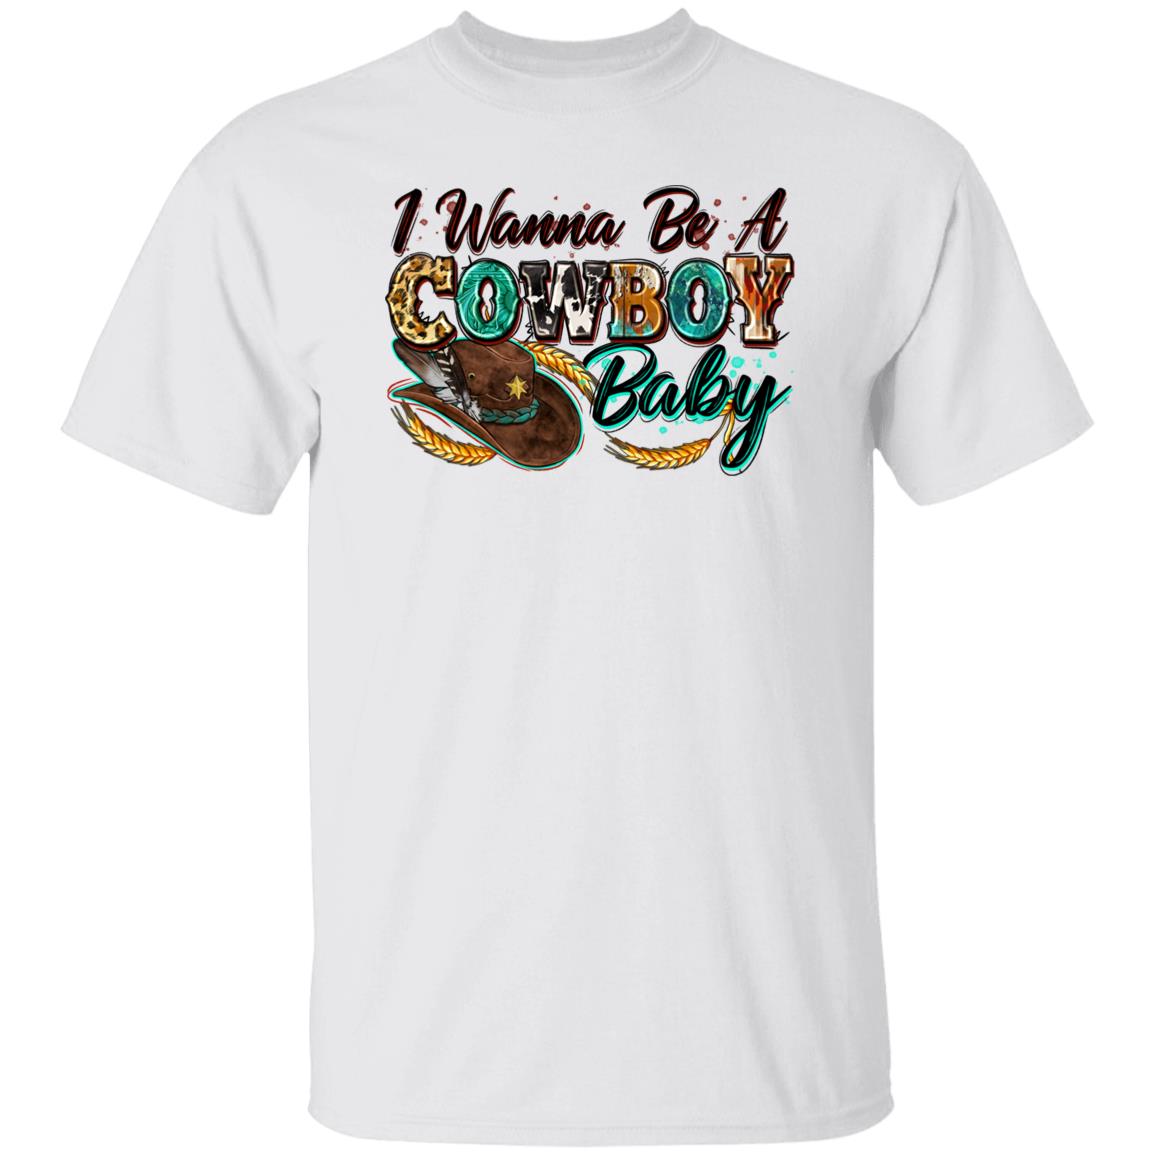 I wanna be a cowboy baby T-Shirt Cowboy girlfriend cowgirl Unisex Tee Sand White Sport Grey-Family-Gift-Planet